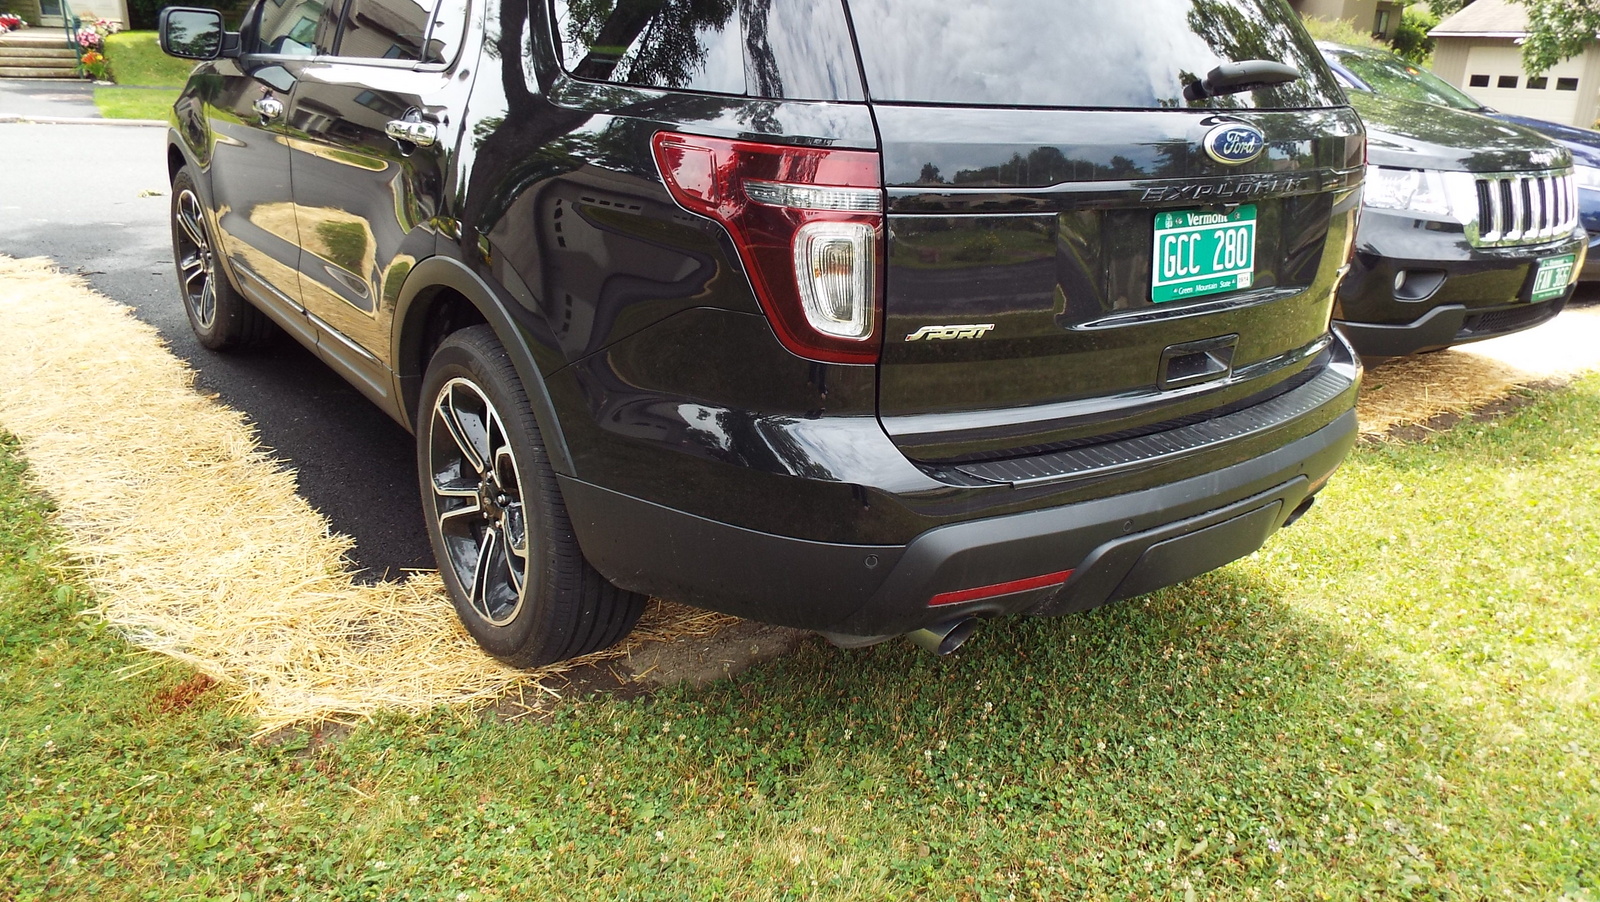 Ford explorer north face review #6